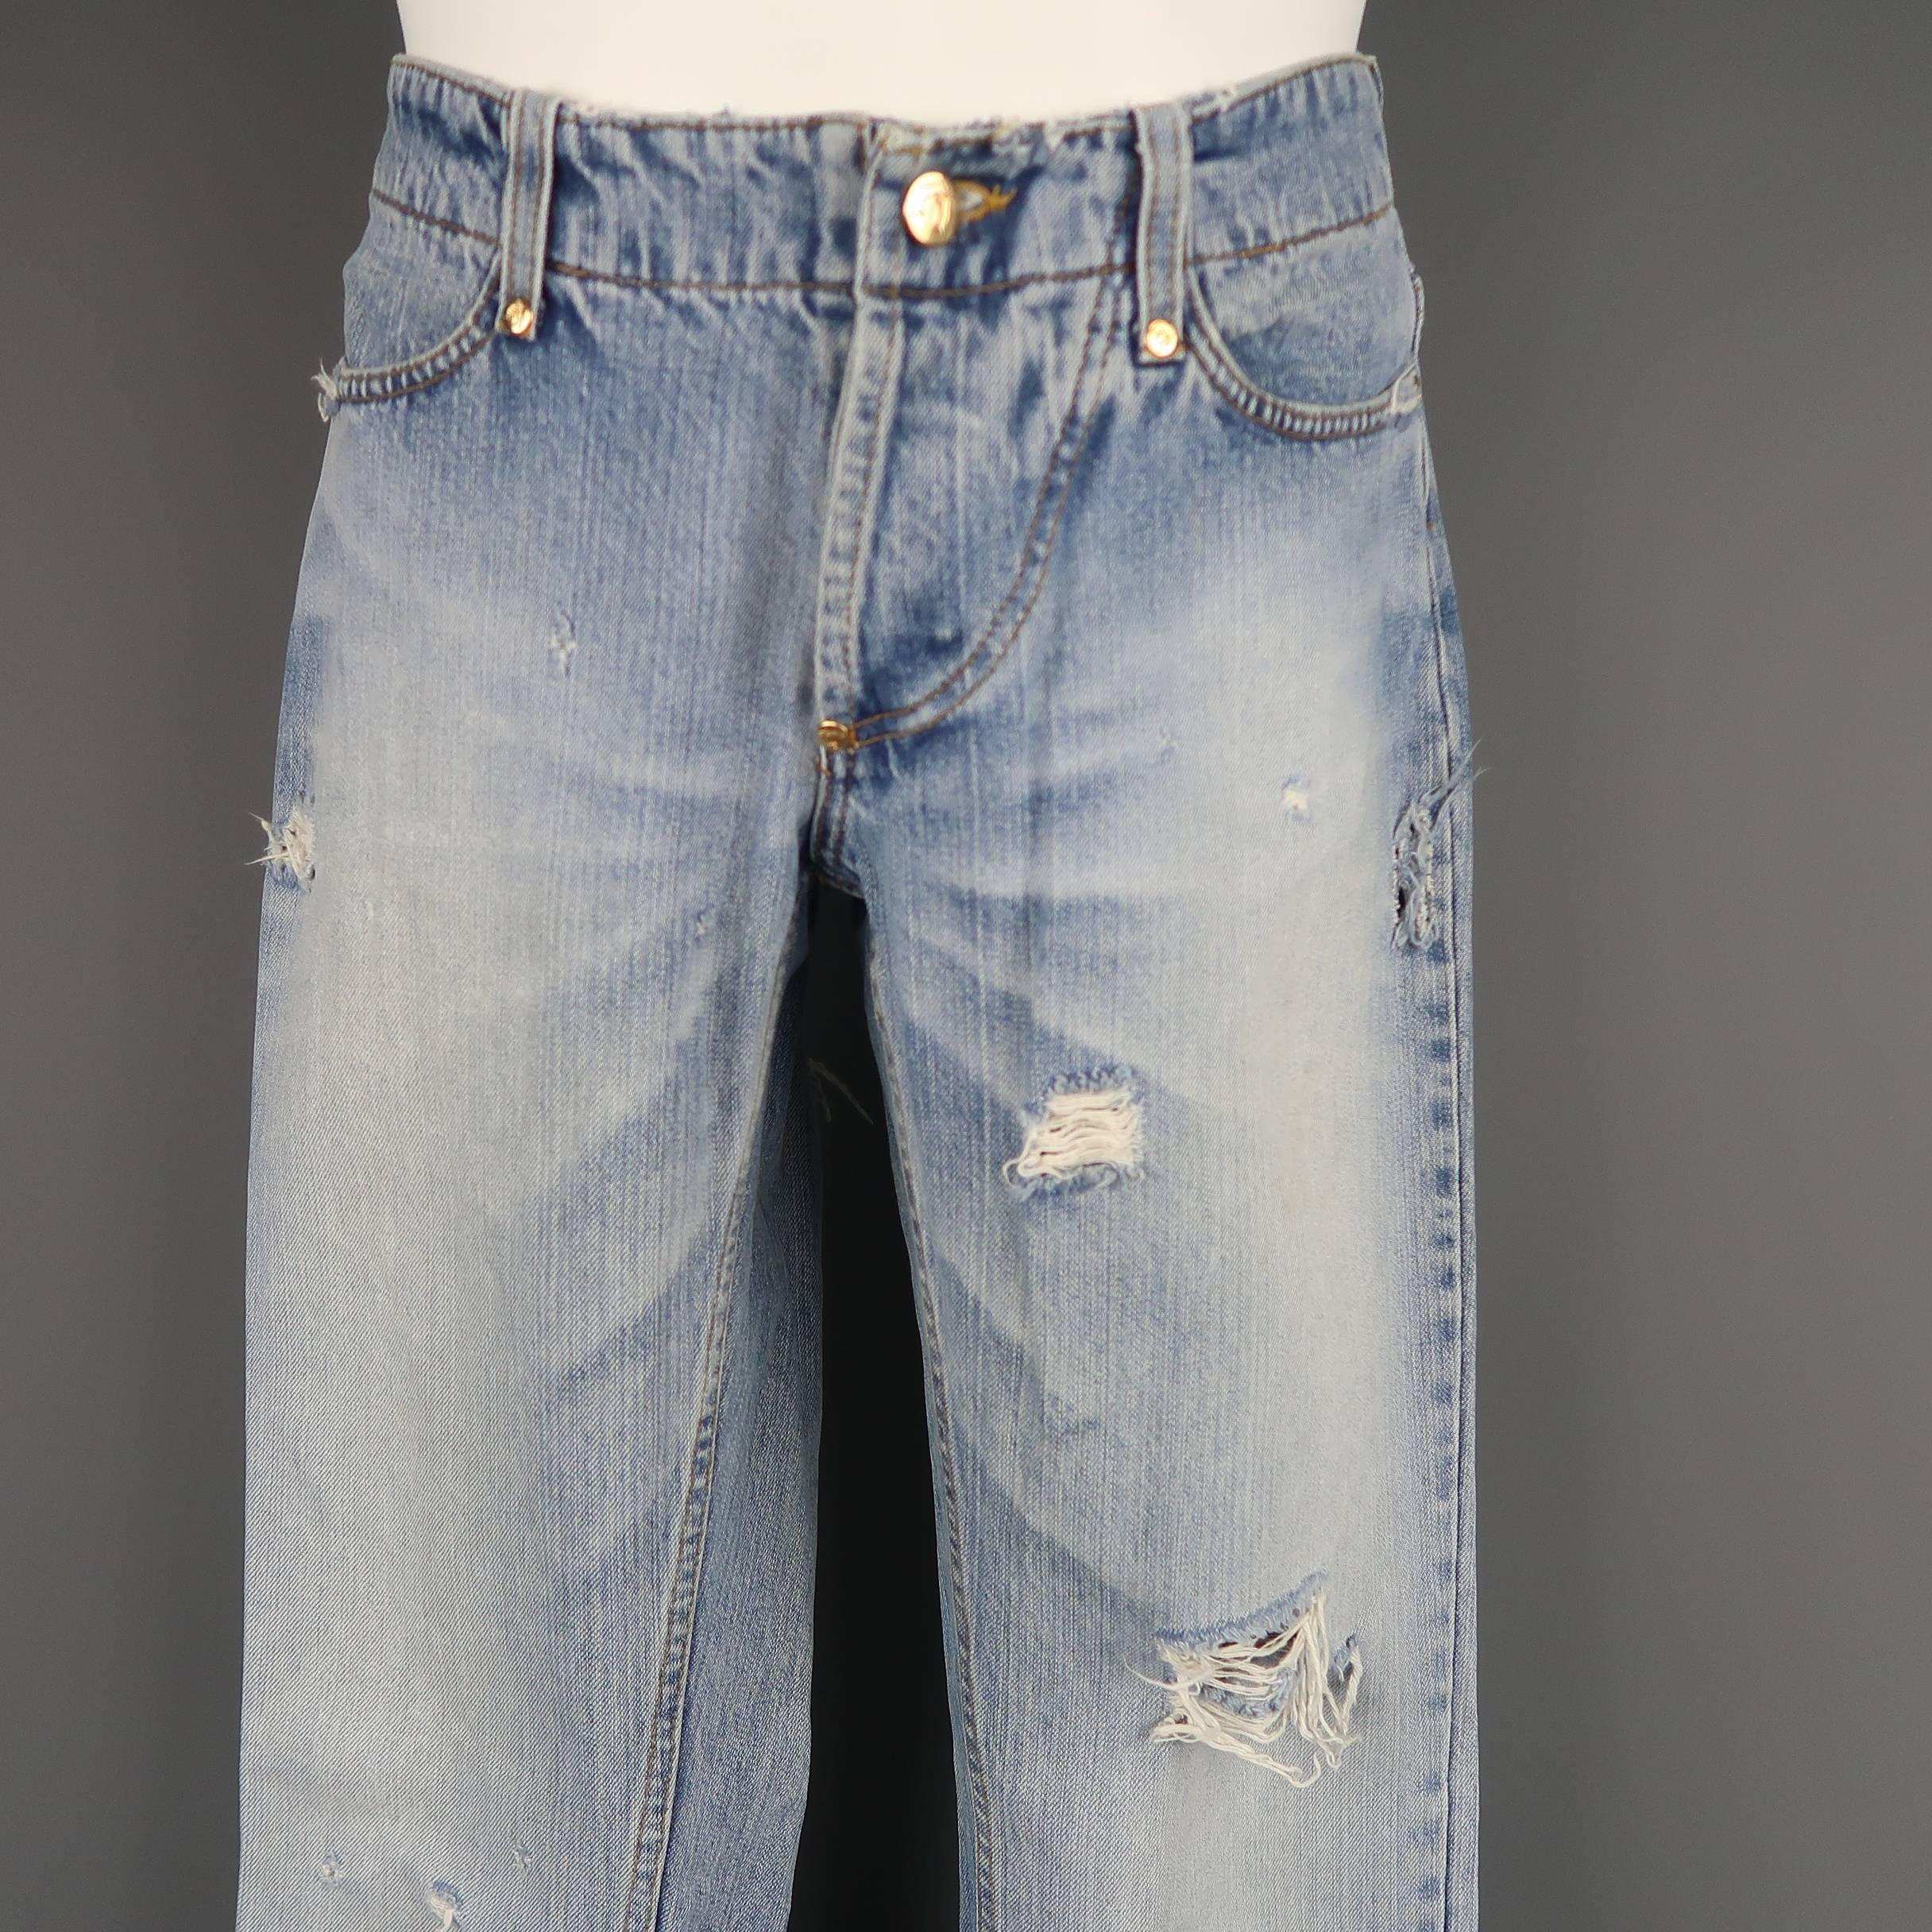 ANGLOMANIA by VIVIENNE WESTWOOD jeans come in a light washed denim with gold tone engraved hardware, a slightly flaired leg, and distressed details throughout. Made in Italy.
 
Good Pre-Owned Condition.
Marked: 32
 
Measurements:
 
Waist: 32